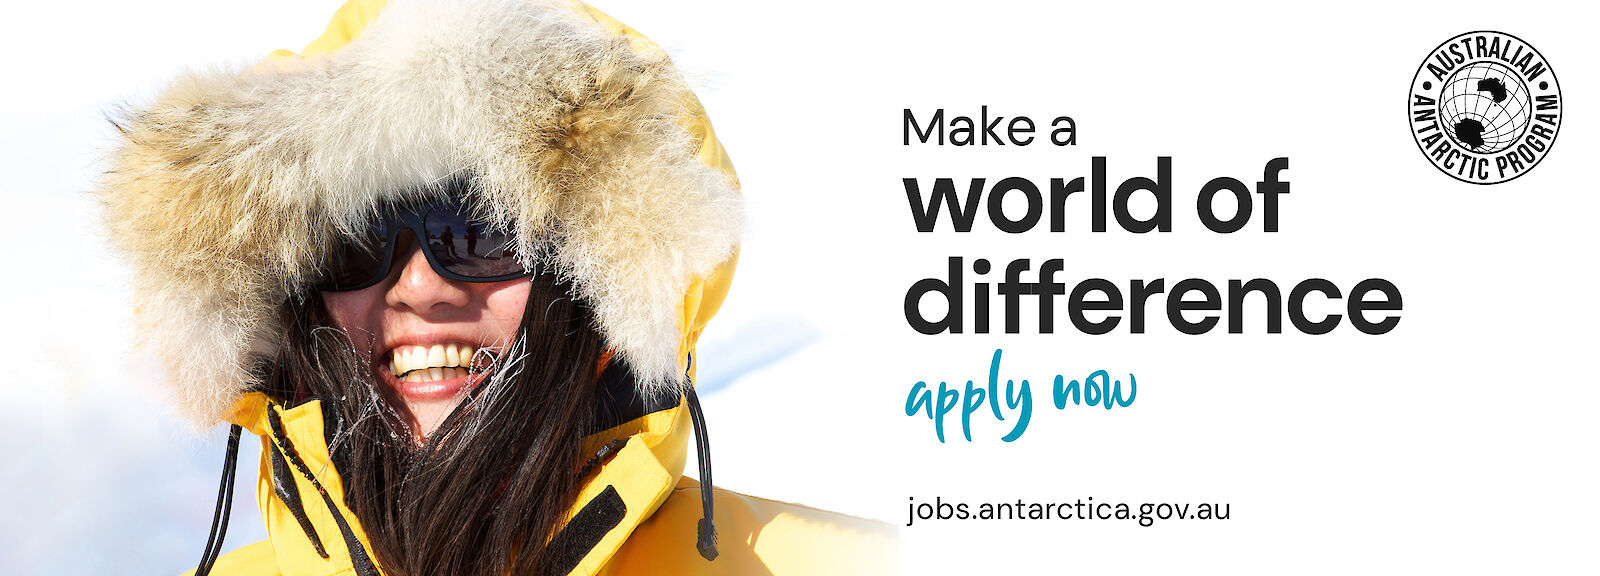 Find what you’re looking for. Apply now. jobs.antarctica.gov.au